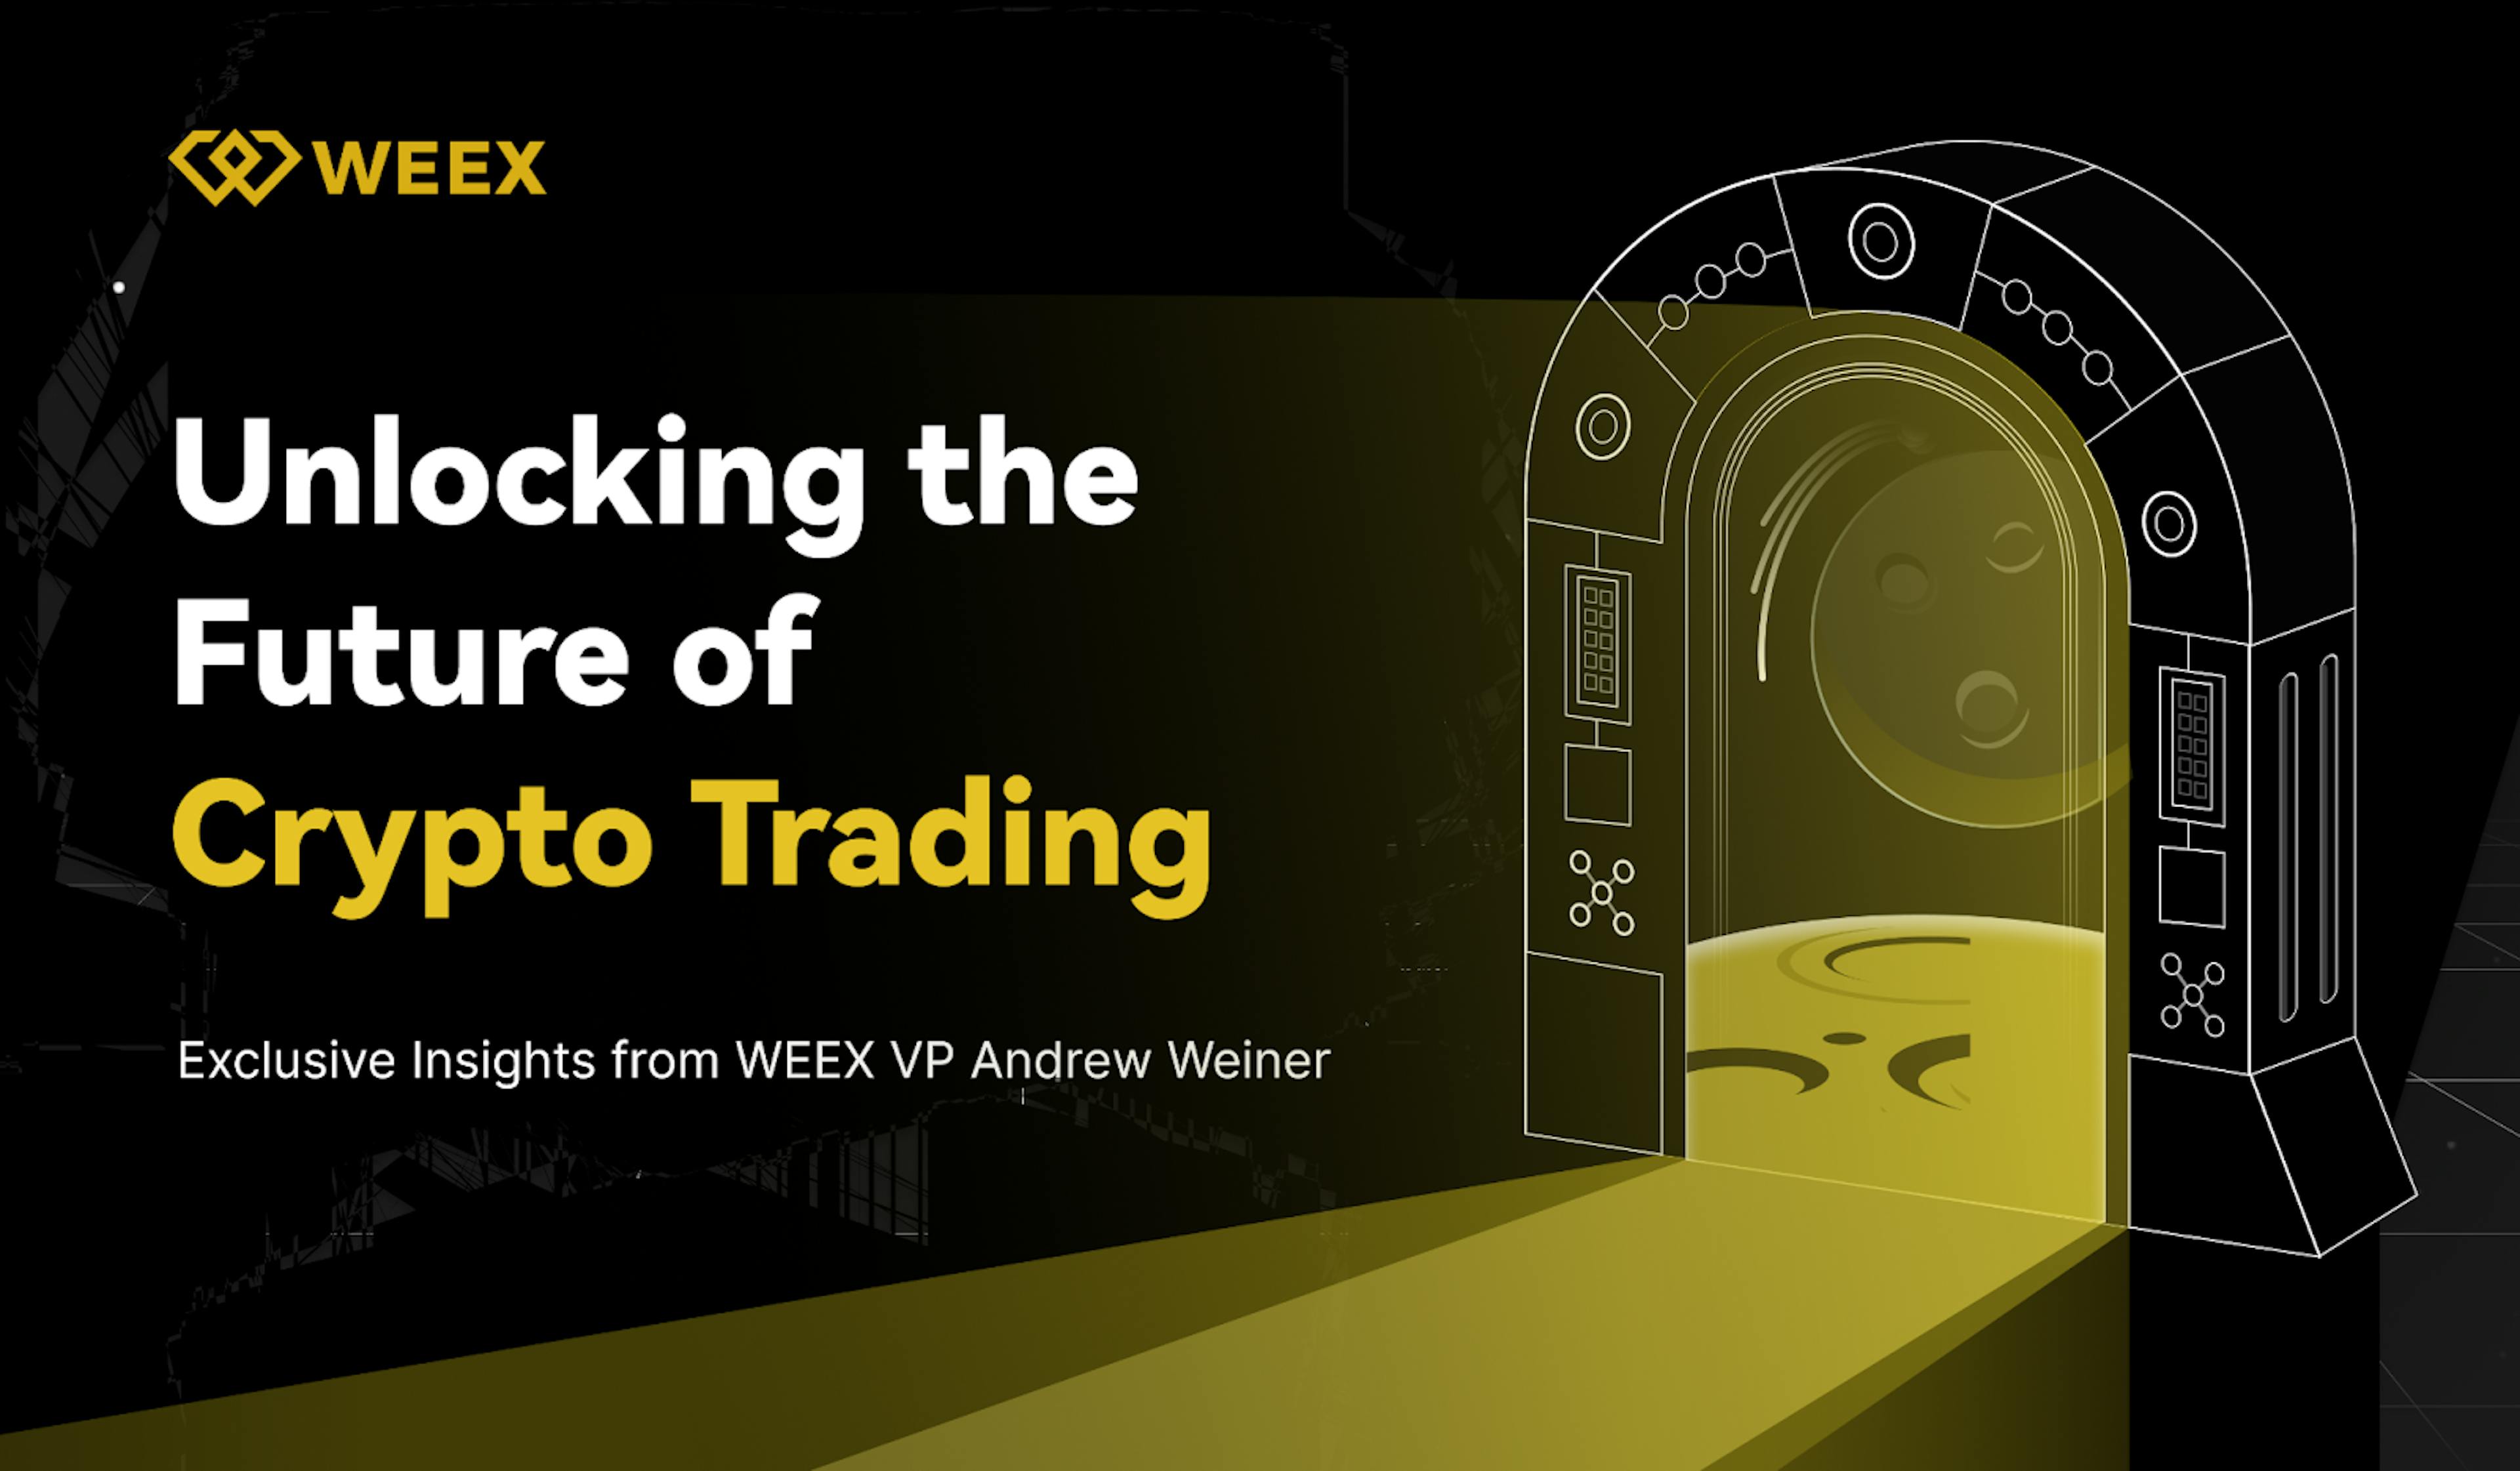 featured image - Interview with Andrew Weiner, VP WEEX: Unlocking the Future of Crypto Trading